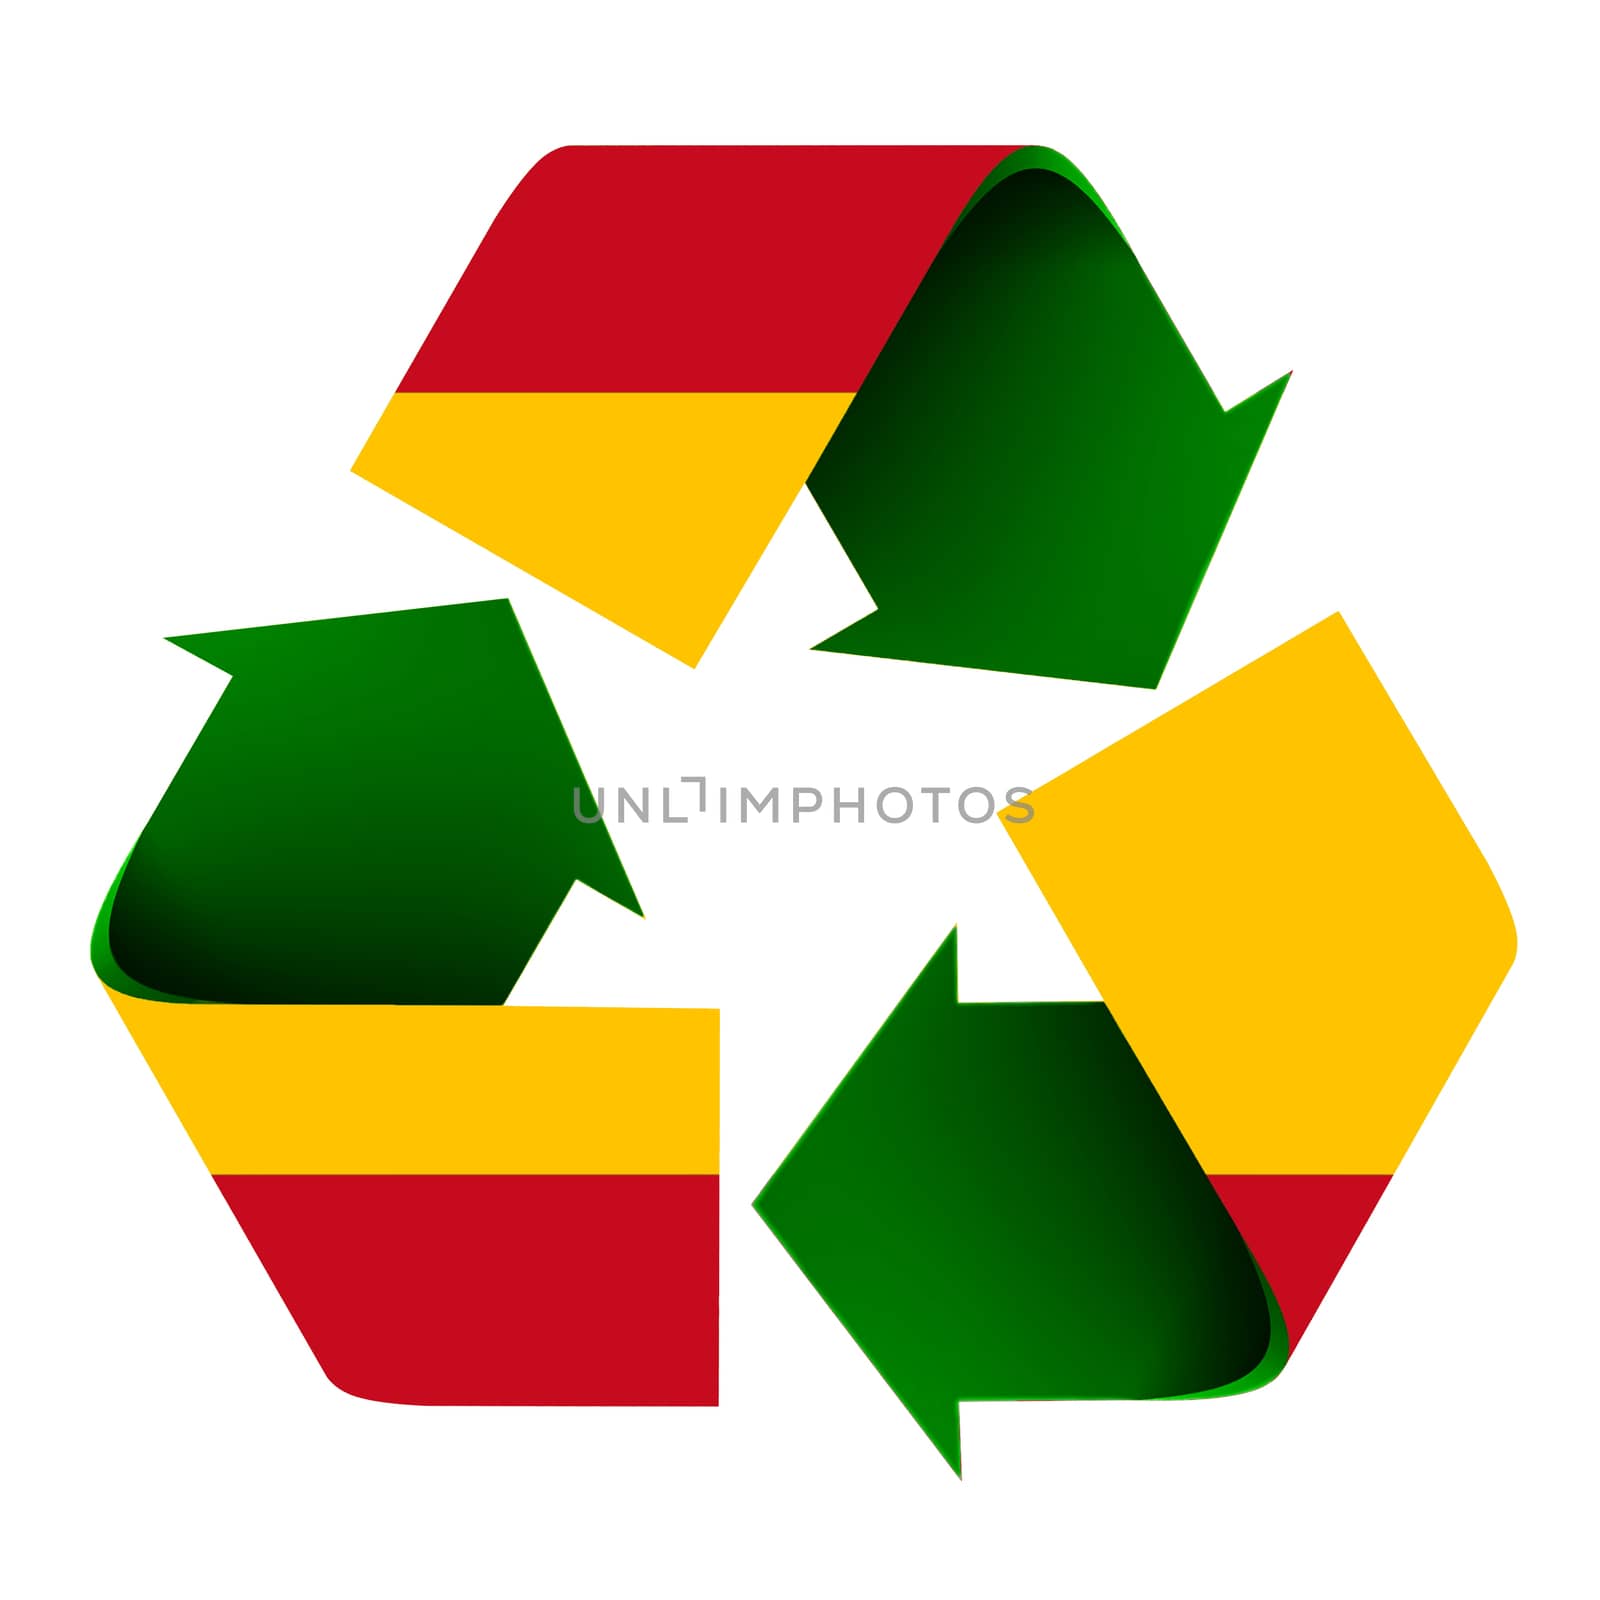 Spanish Flag on a Recycle Symbol by rcarner